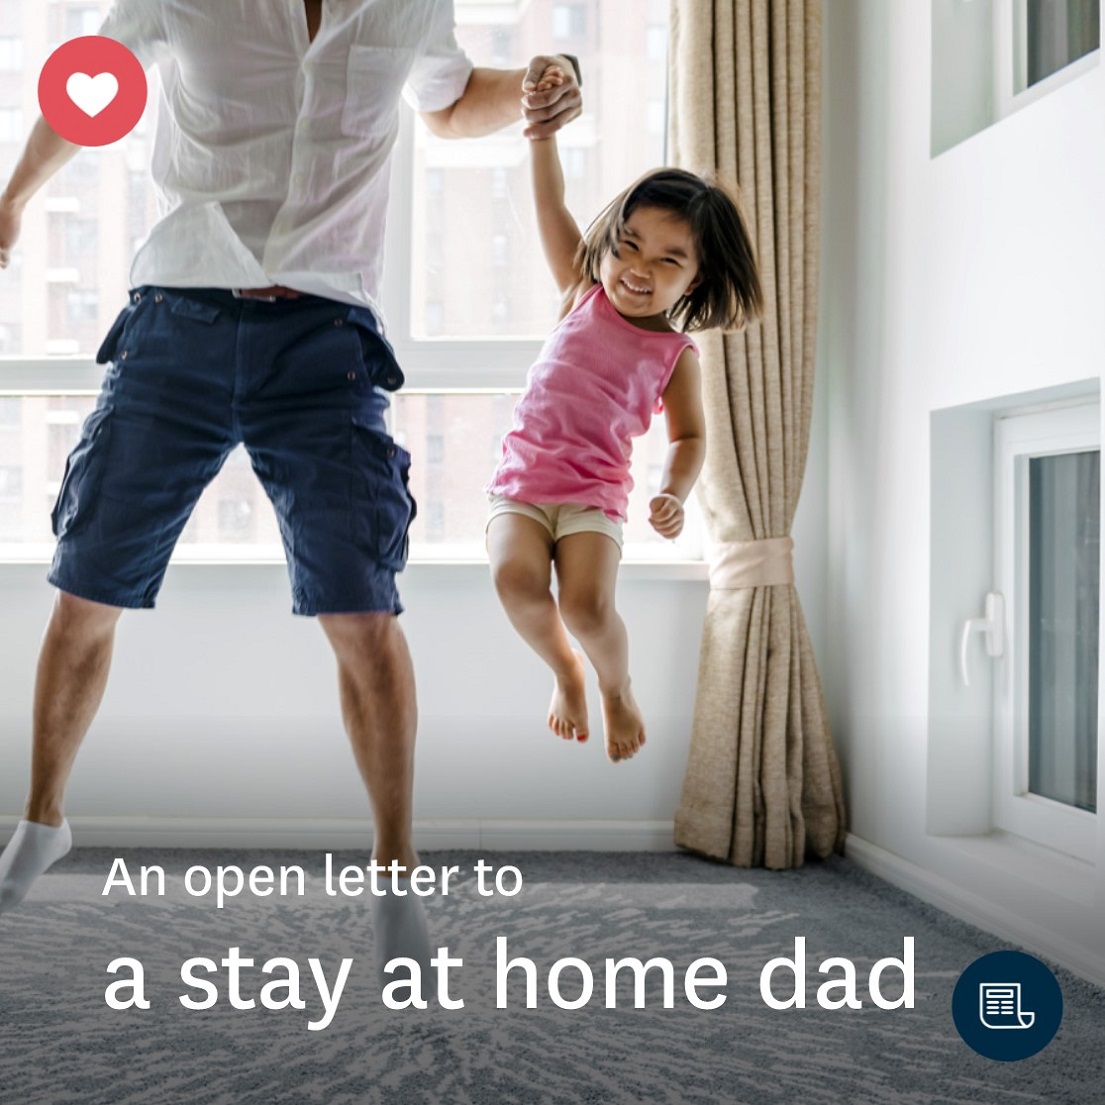 An open letter to a stay at home dad